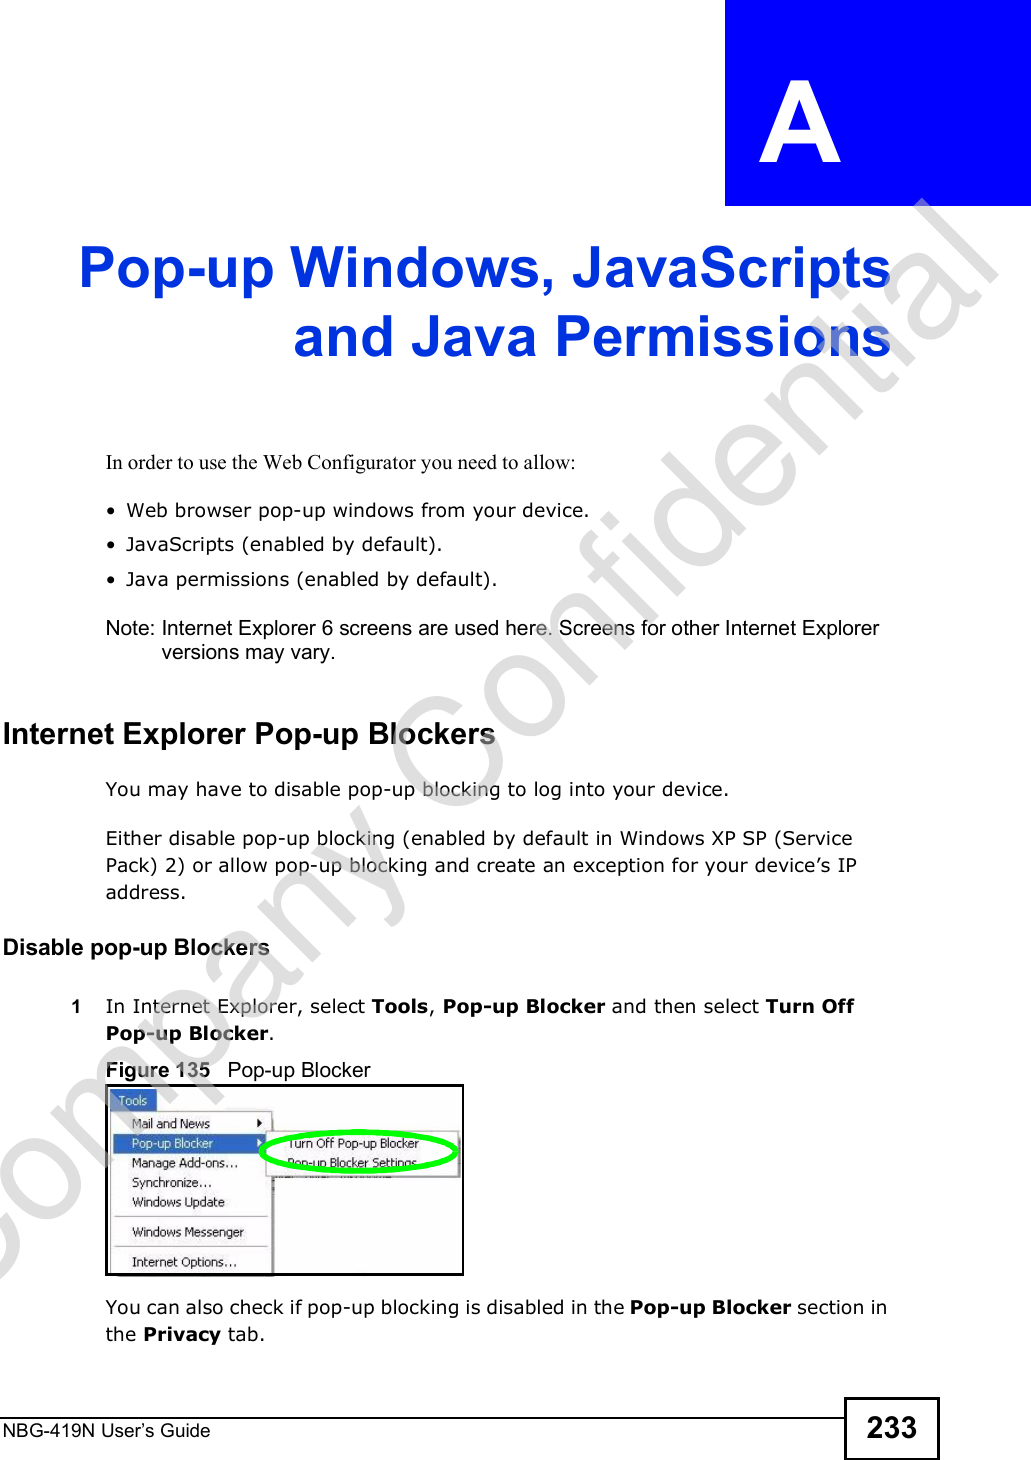 NBG-419N User s Guide 233APPENDIX  A Pop-up Windows, JavaScriptsand Java PermissionsIn order to use the Web Configurator you need to allow: Web browser pop-up windows from your device. JavaScripts (enabled by default). Java permissions (enabled by default).Note: Internet Explorer 6 screens are used here. Screens for other Internet Explorer versions may vary.Internet Explorer Pop-up BlockersYou may have to disable pop-up blocking to log into your device. Either disable pop-up blocking (enabled by default in Windows XP SP (Service Pack) 2) or allow pop-up blocking and create an exception for your device!s IP address.Disable pop-up Blockers1In Internet Explorer, select Tools, Pop-up Blocker and then select Turn Off Pop-up Blocker. Figure 135   Pop-up BlockerYou can also check if pop-up blocking is disabled in the Pop-up Blocker section in the Privacy tab. Company Confidential